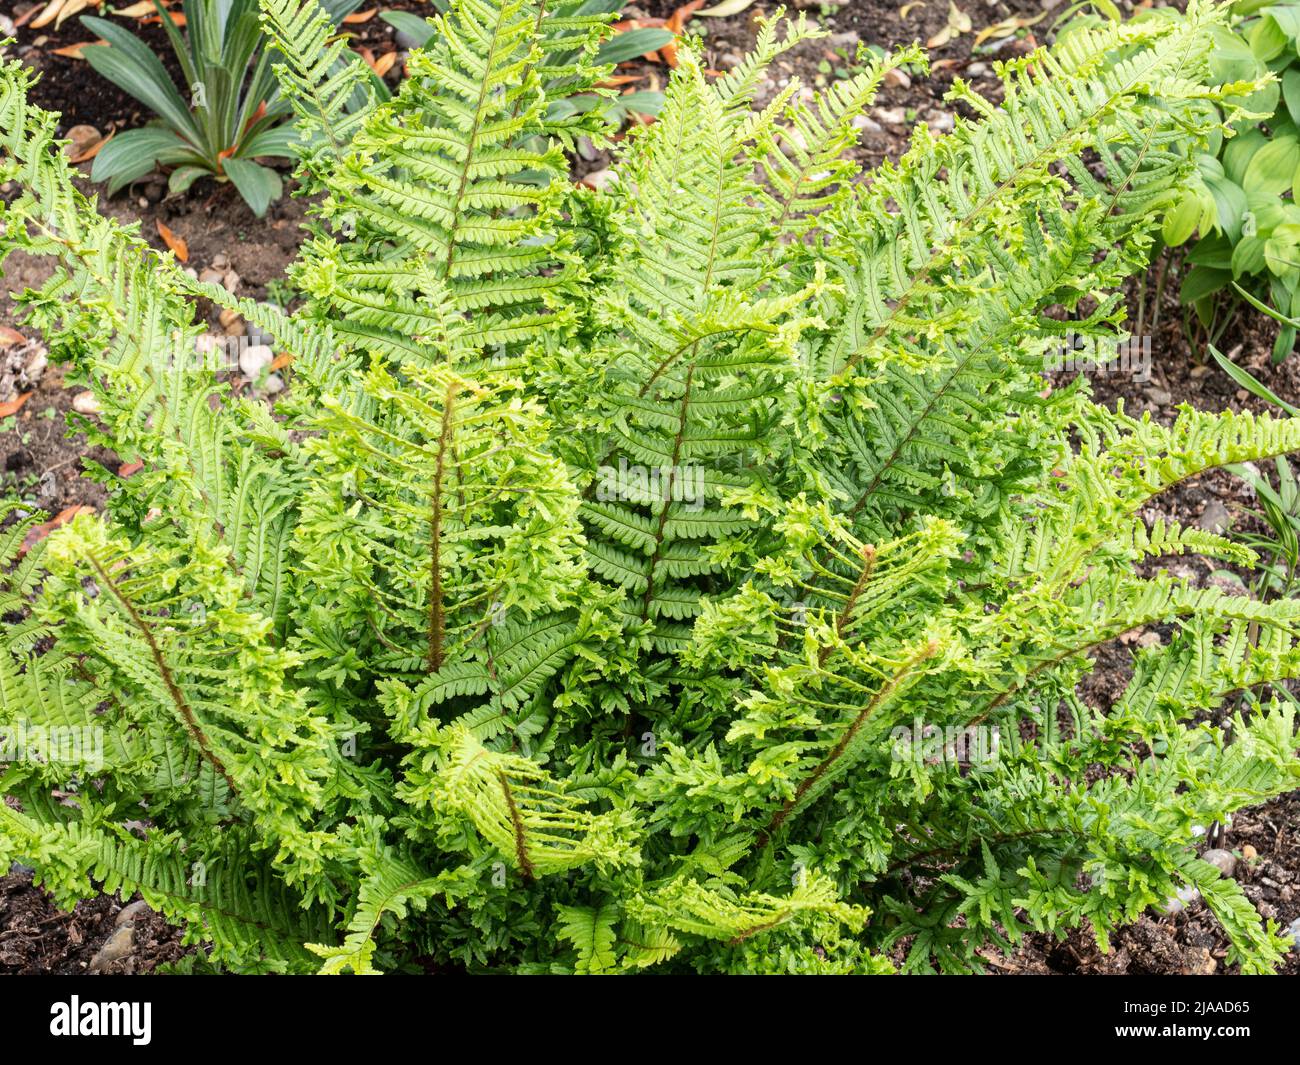 The UK native fern Dryopteris filix mas 'Cristata the King' growing in a raised bed Stock Photo